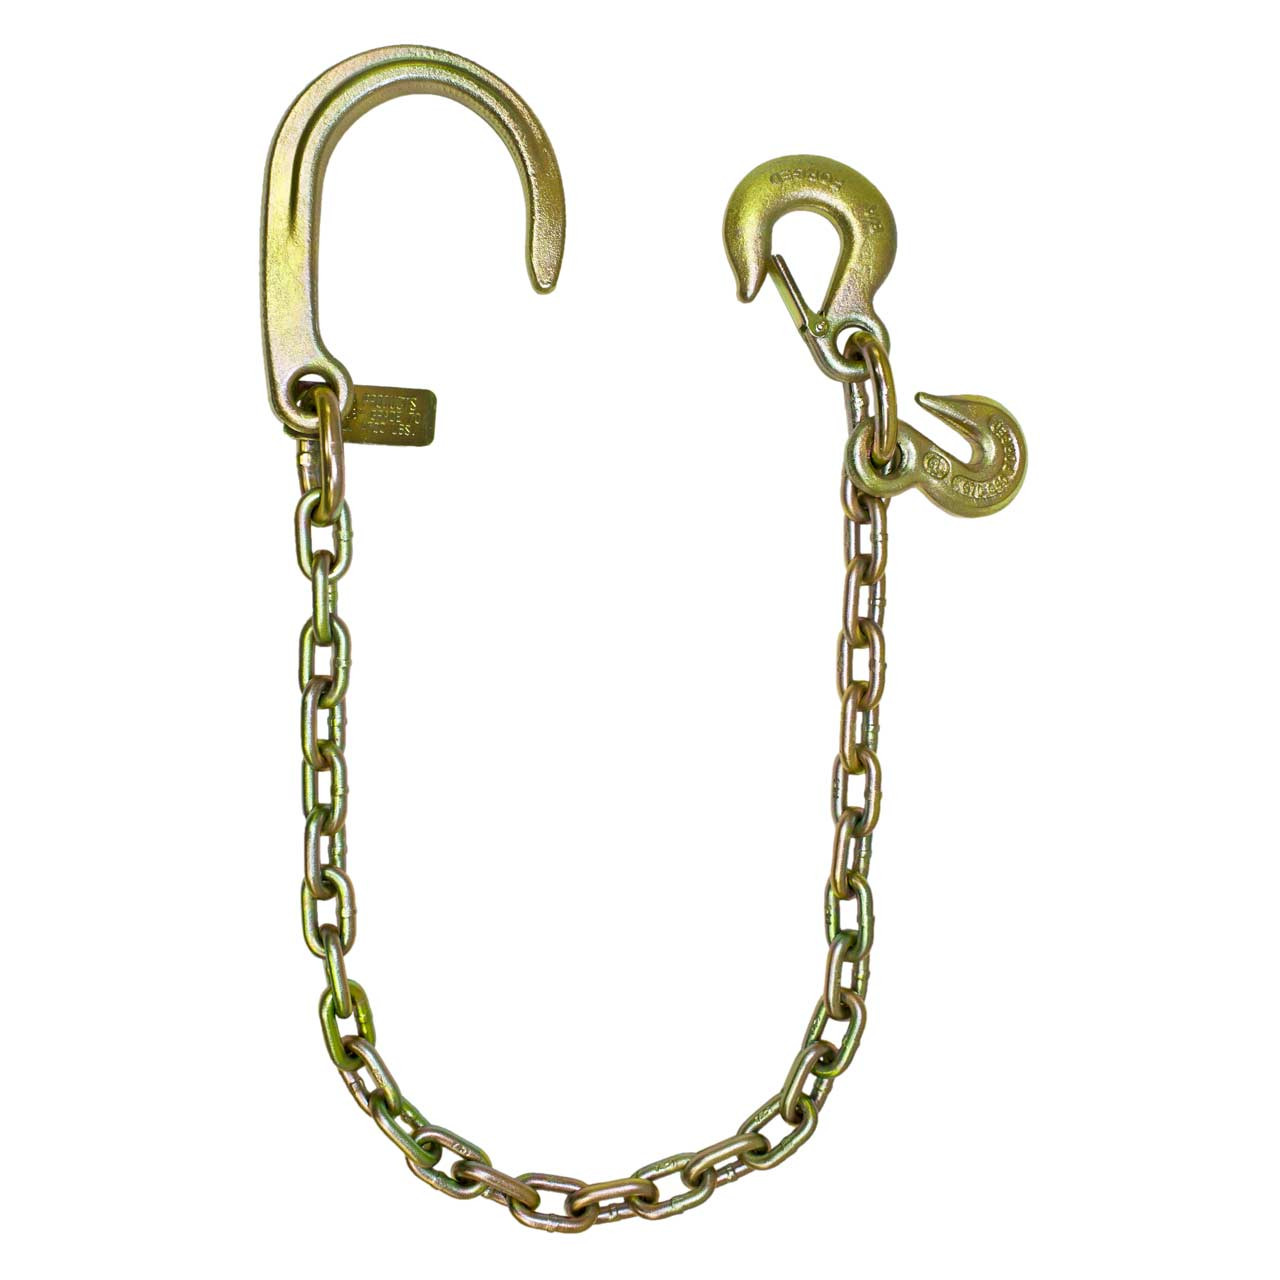 B/A Products Axle Chain - 3-ft. Chain with 8inch J-Hook and 2 Grab Hooks, Model N711-AC3